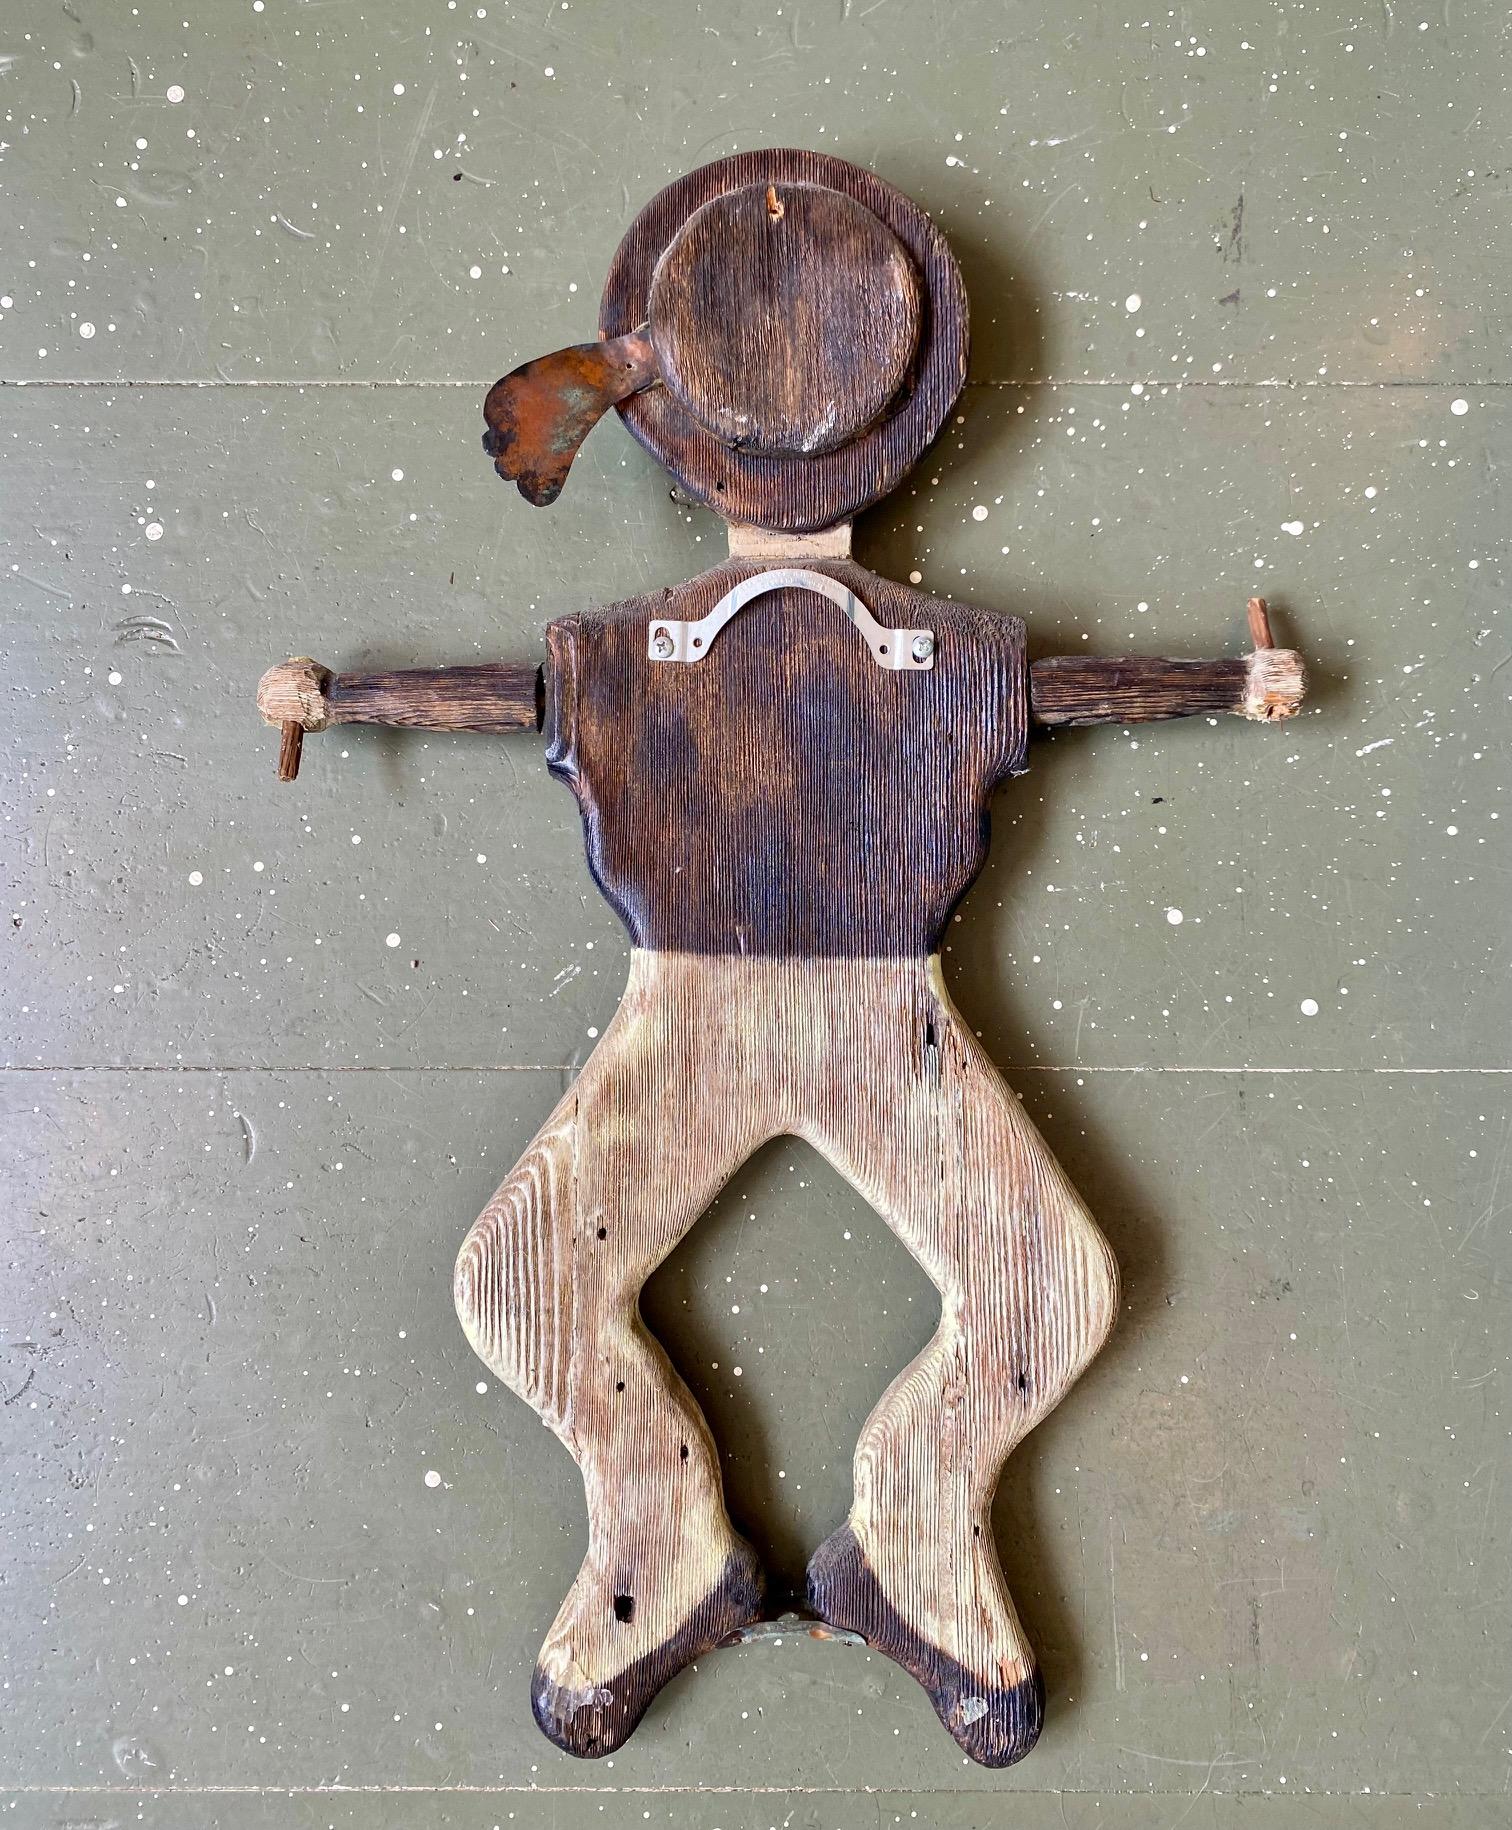 Antique Nantucket Sailor Boy Whirligig, circa 1880, by either Billy Ray or Charles C. Ray (born 1824), a hand carved flat figure of a sailor in brown and white paint, wearing round cap with metal ribbon, loose sailor's blouse and pants, and carved